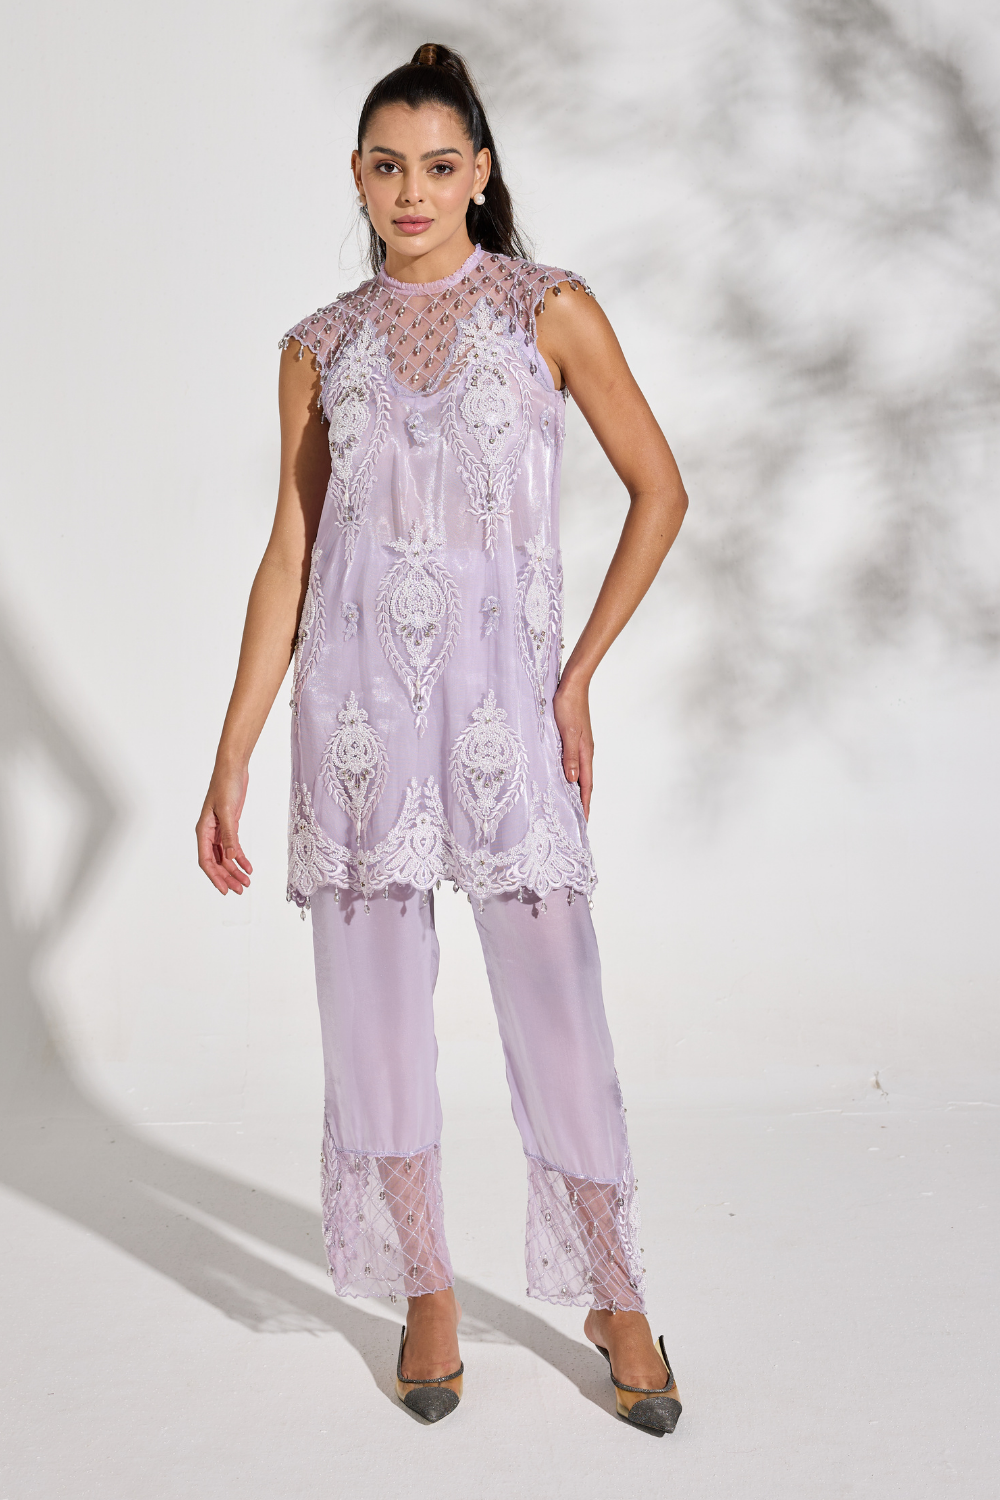 Beaded Lilac Set, a product by Saltz n sand 